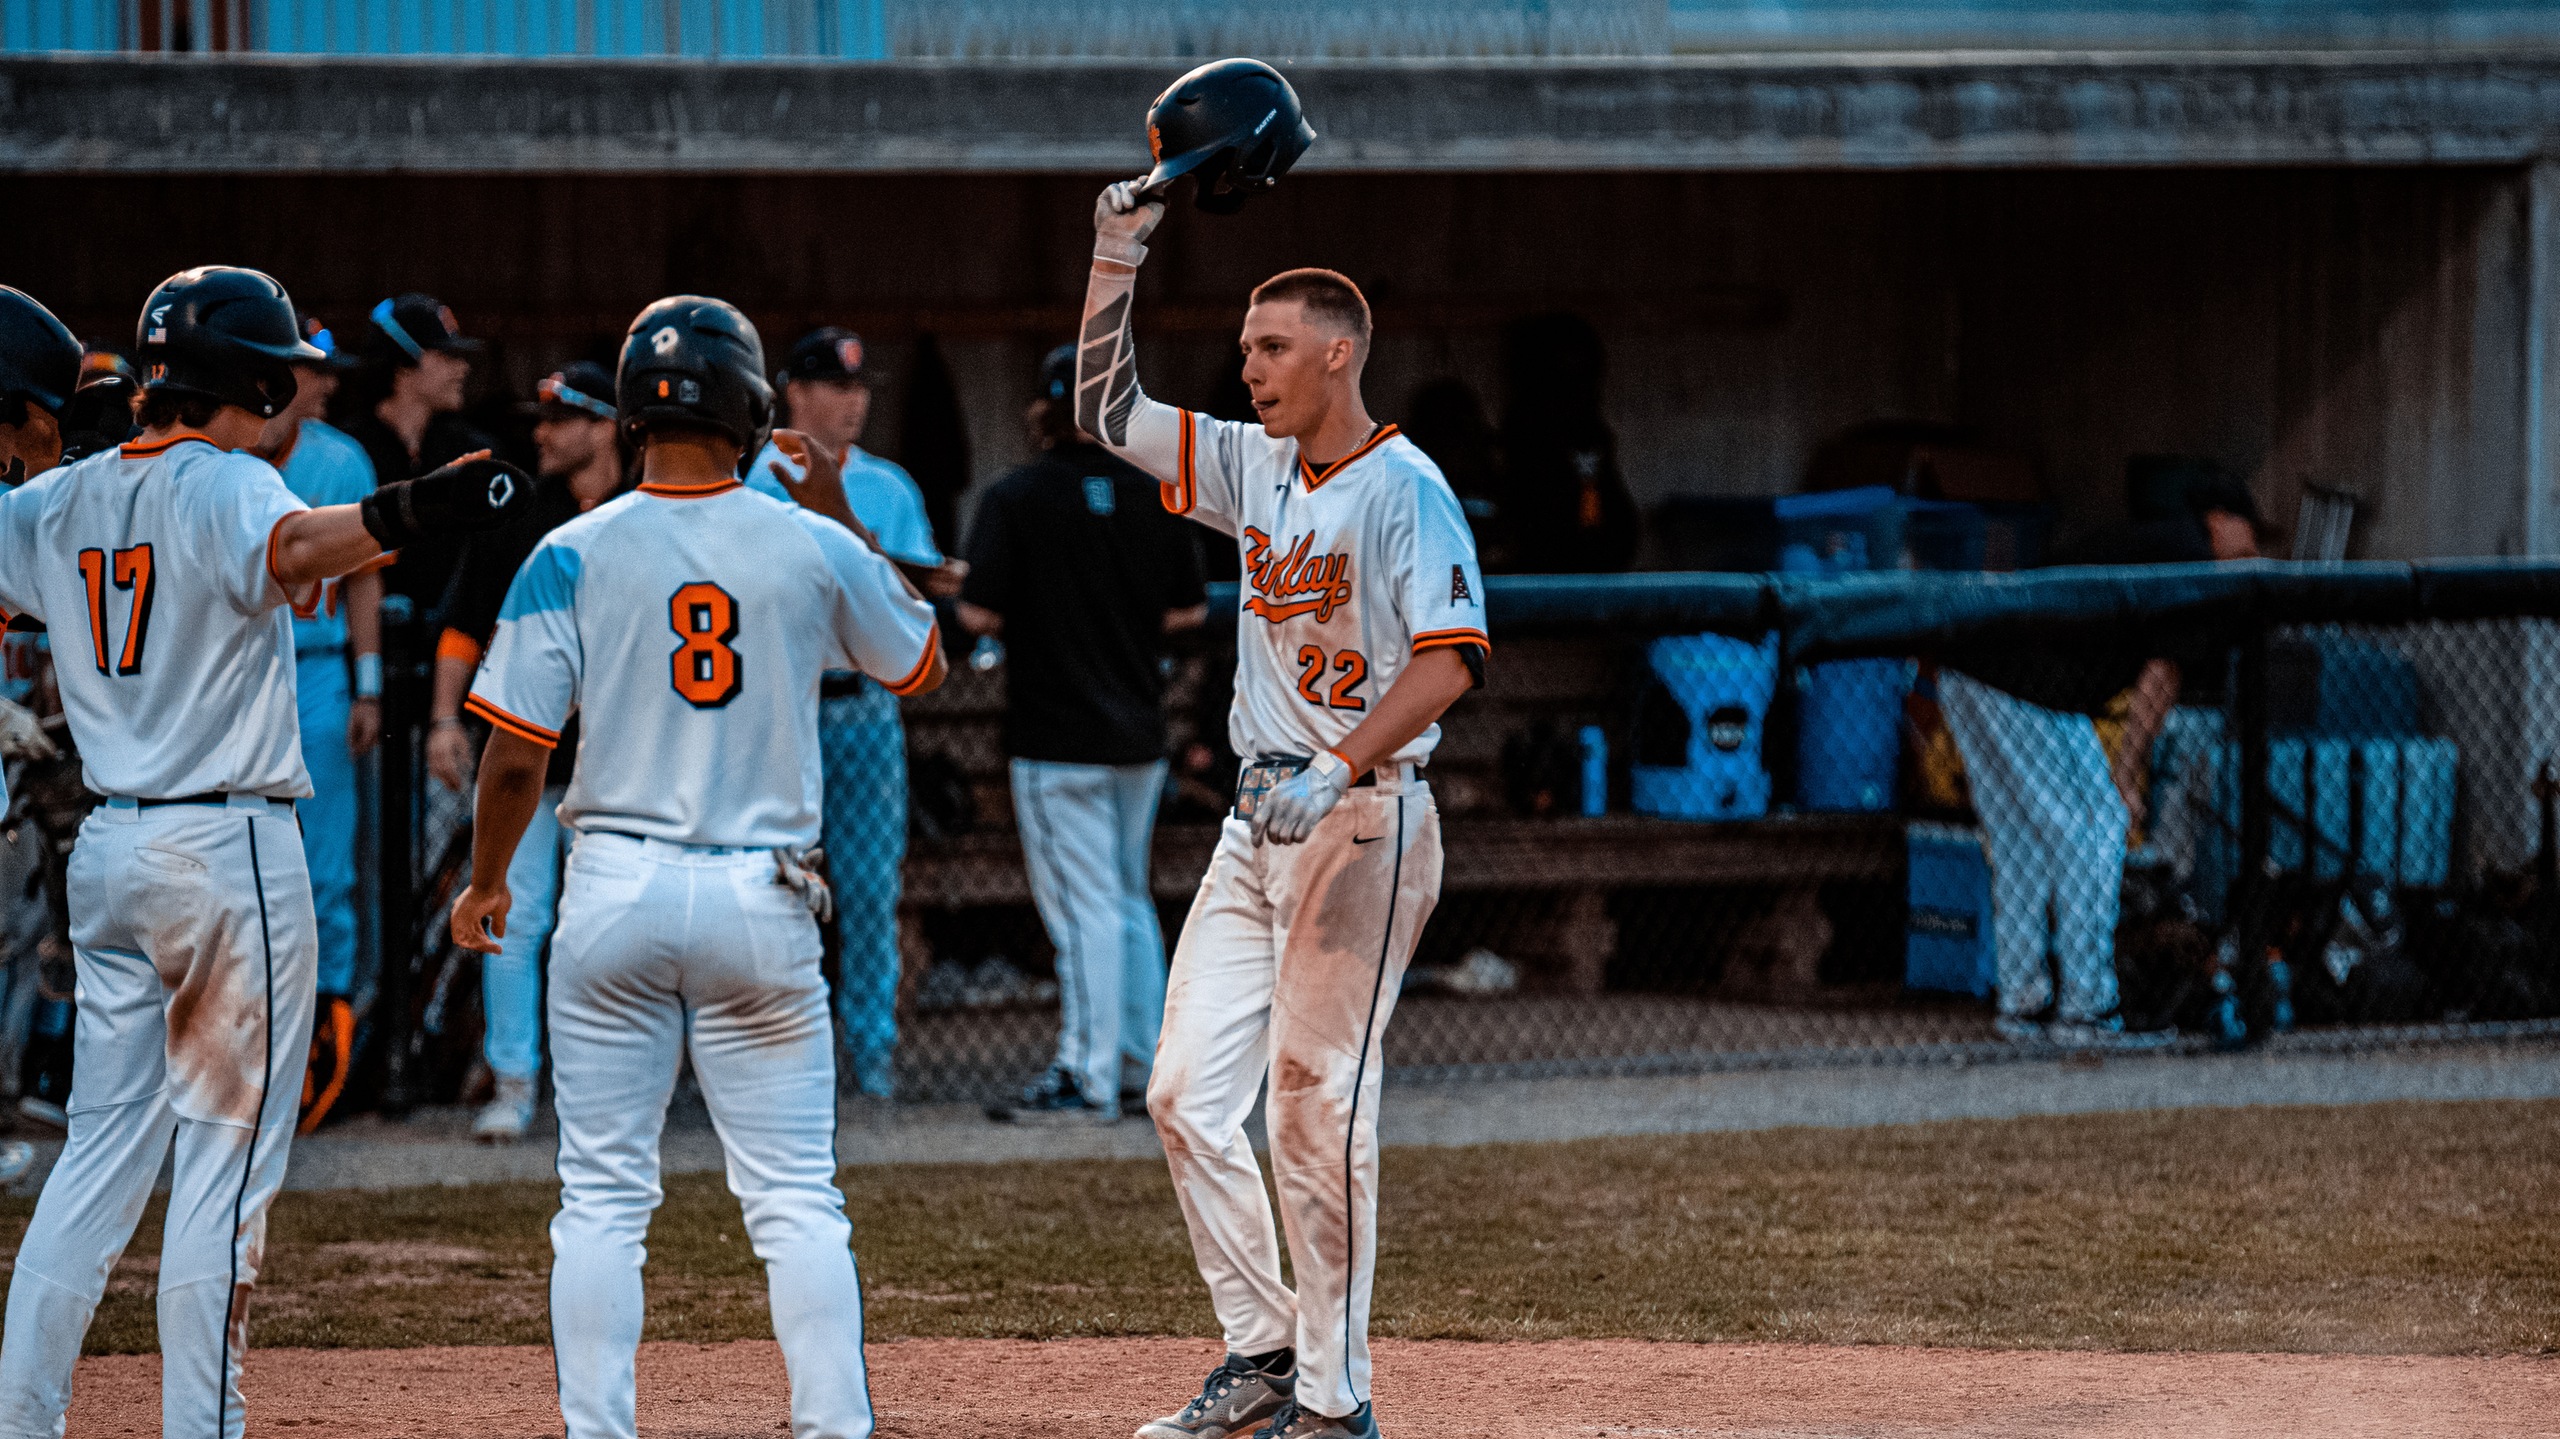 Walk in the Park | Oilers Take Advantage of 25 Free Bases in Doubleheader Drubbing of Mercyhurst